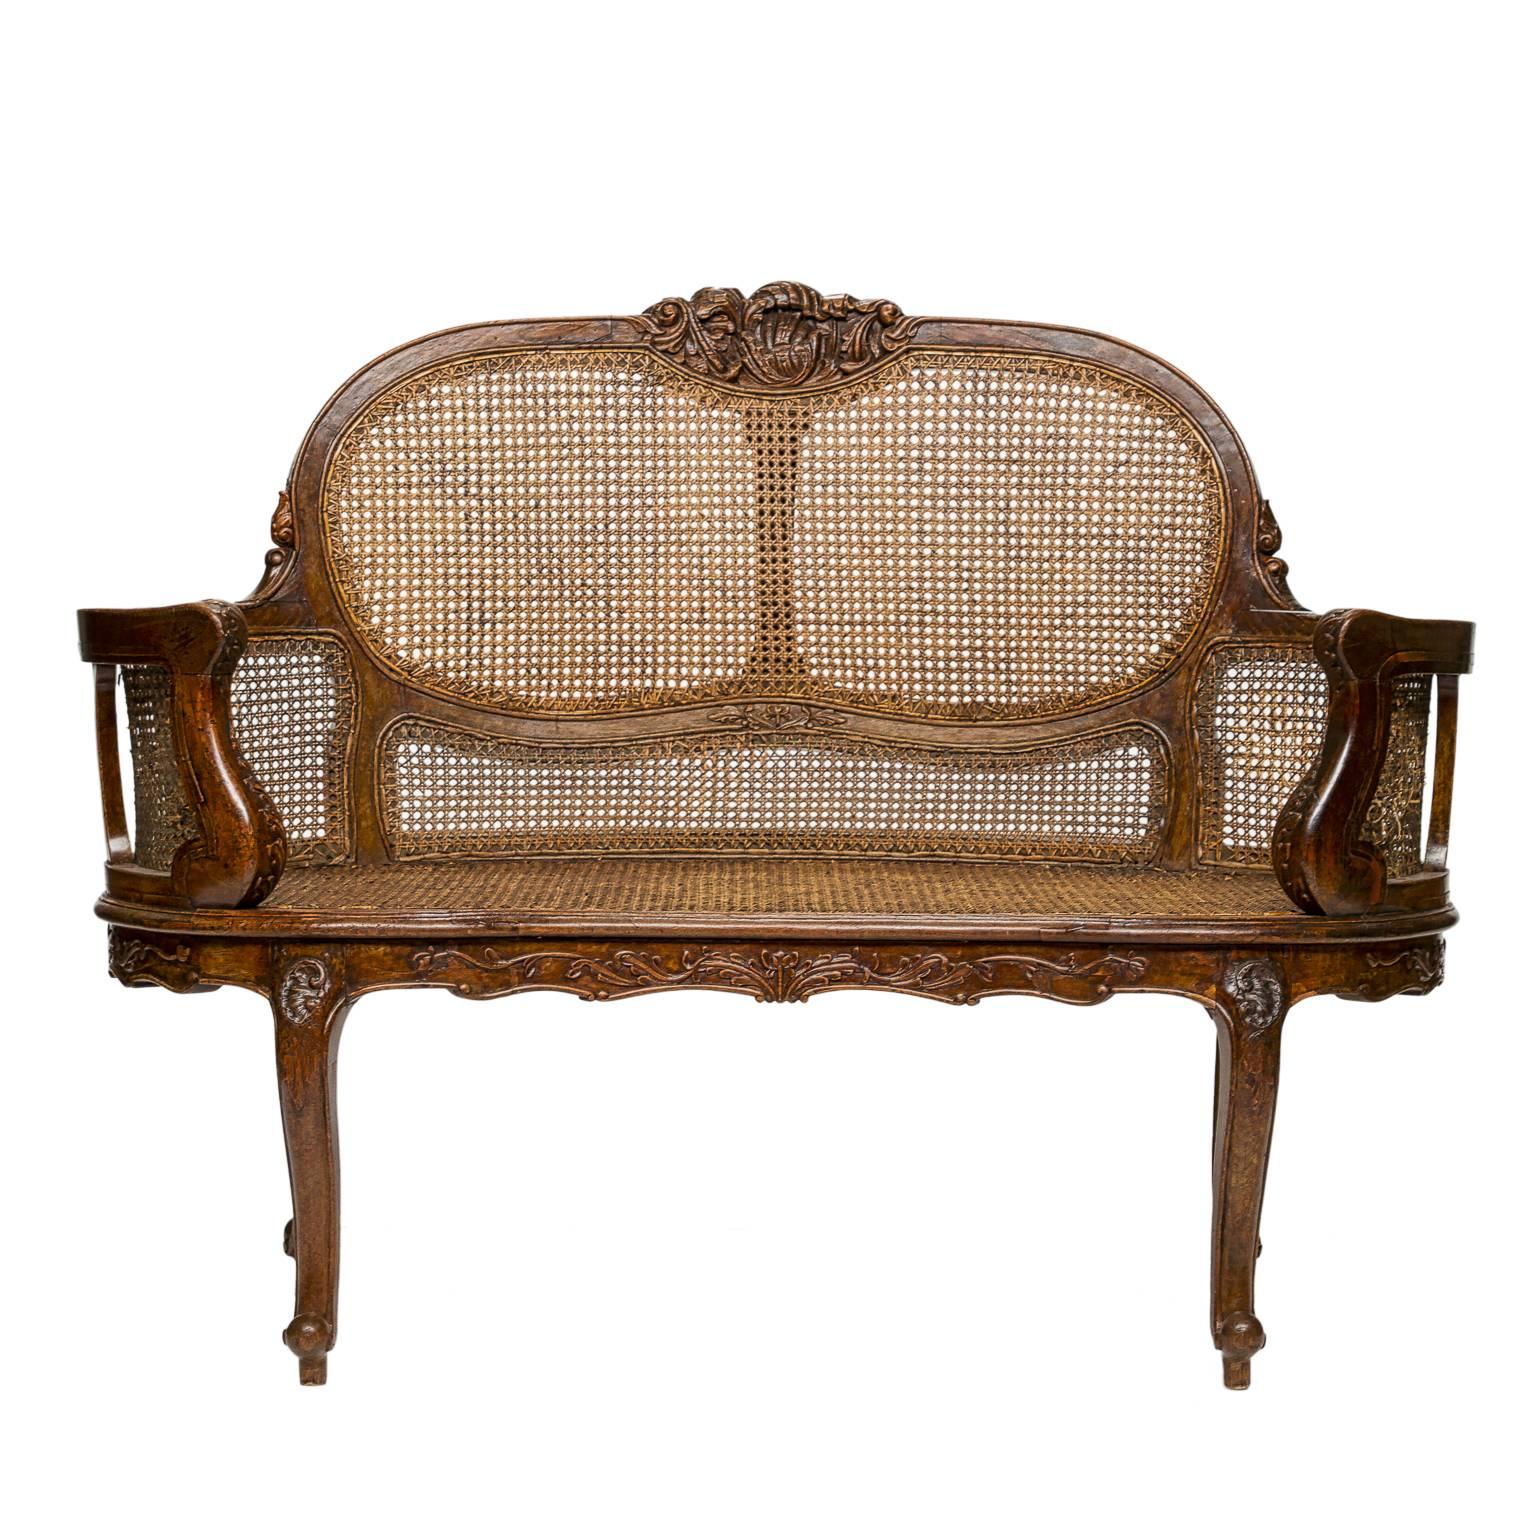 This Louis XV walnut settee features an exposed cane and carved wood frame. It has a floral cresting and carved apron. The back barrels into the arm supports, which are carved. The settee rests upon four cabriole legs. The front left panel behind